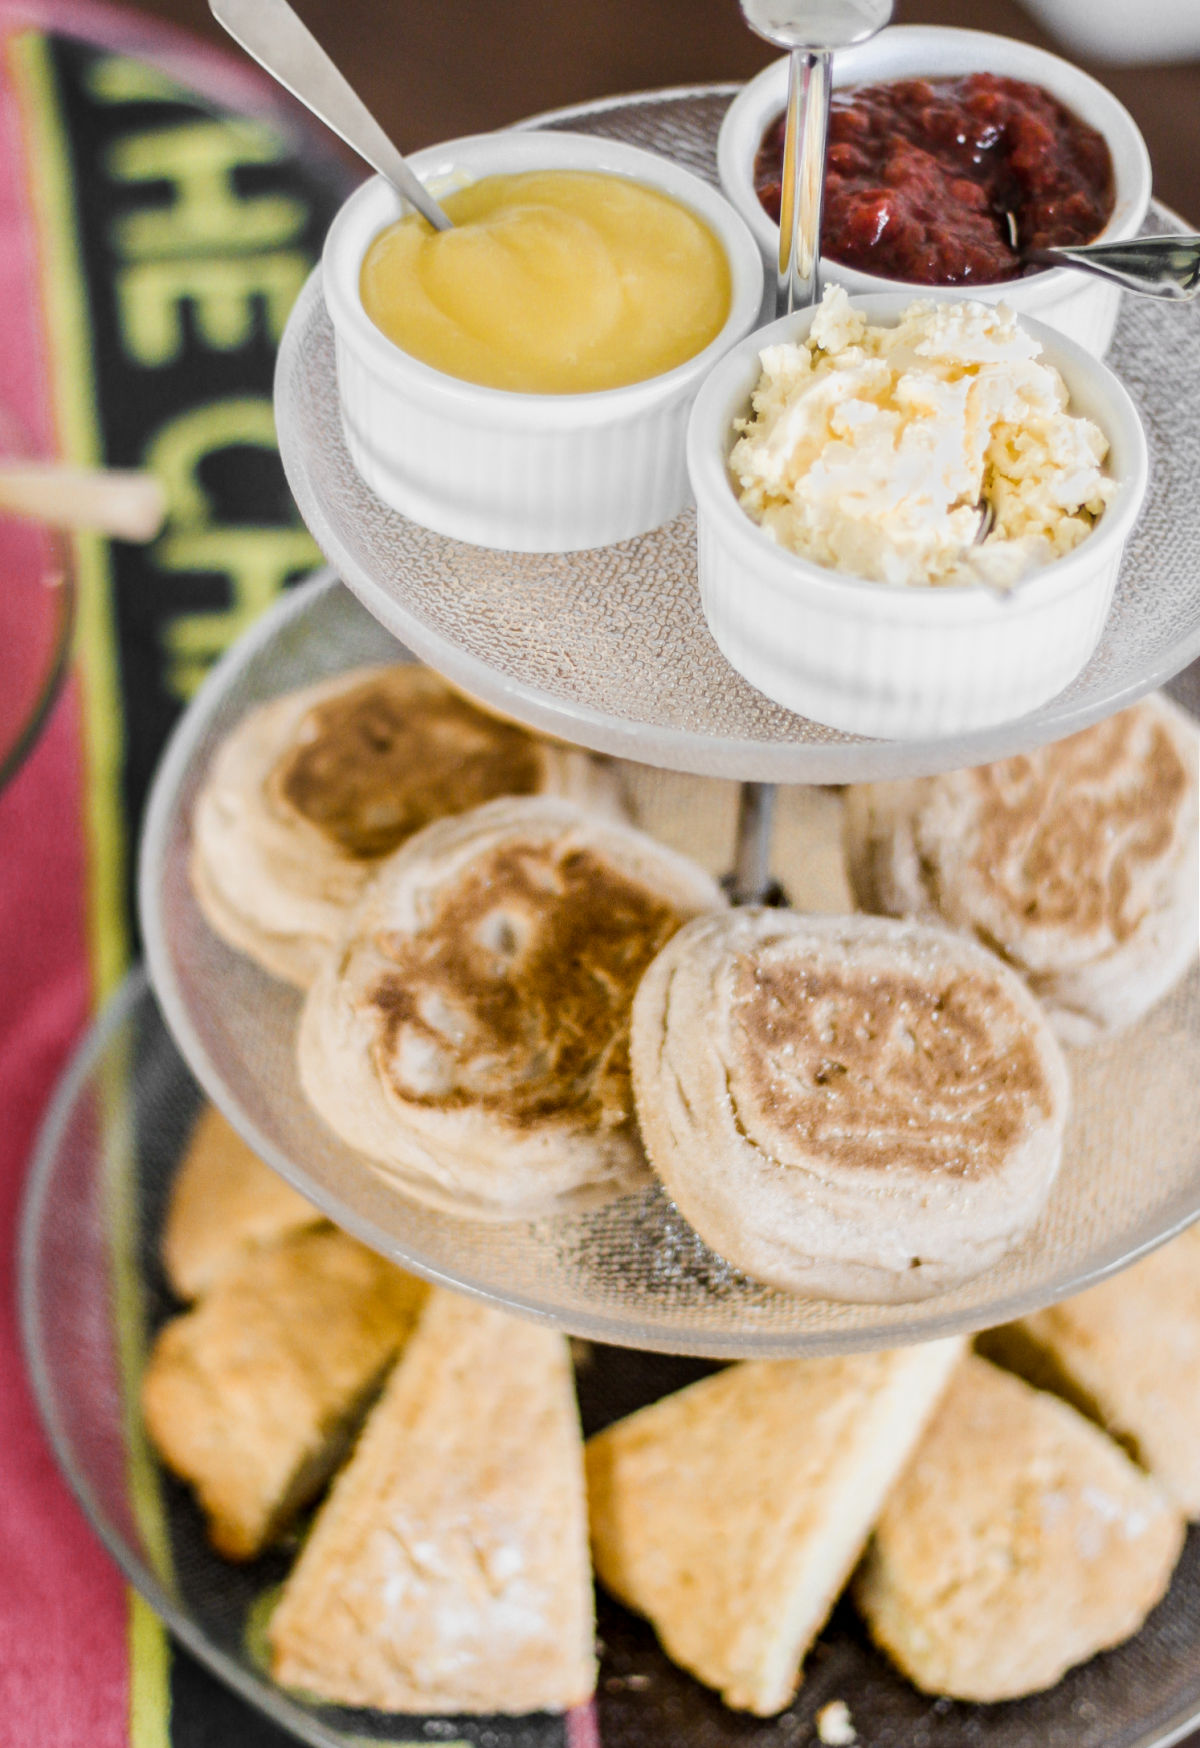 3 tiered server with scones, crumpets and condiments.